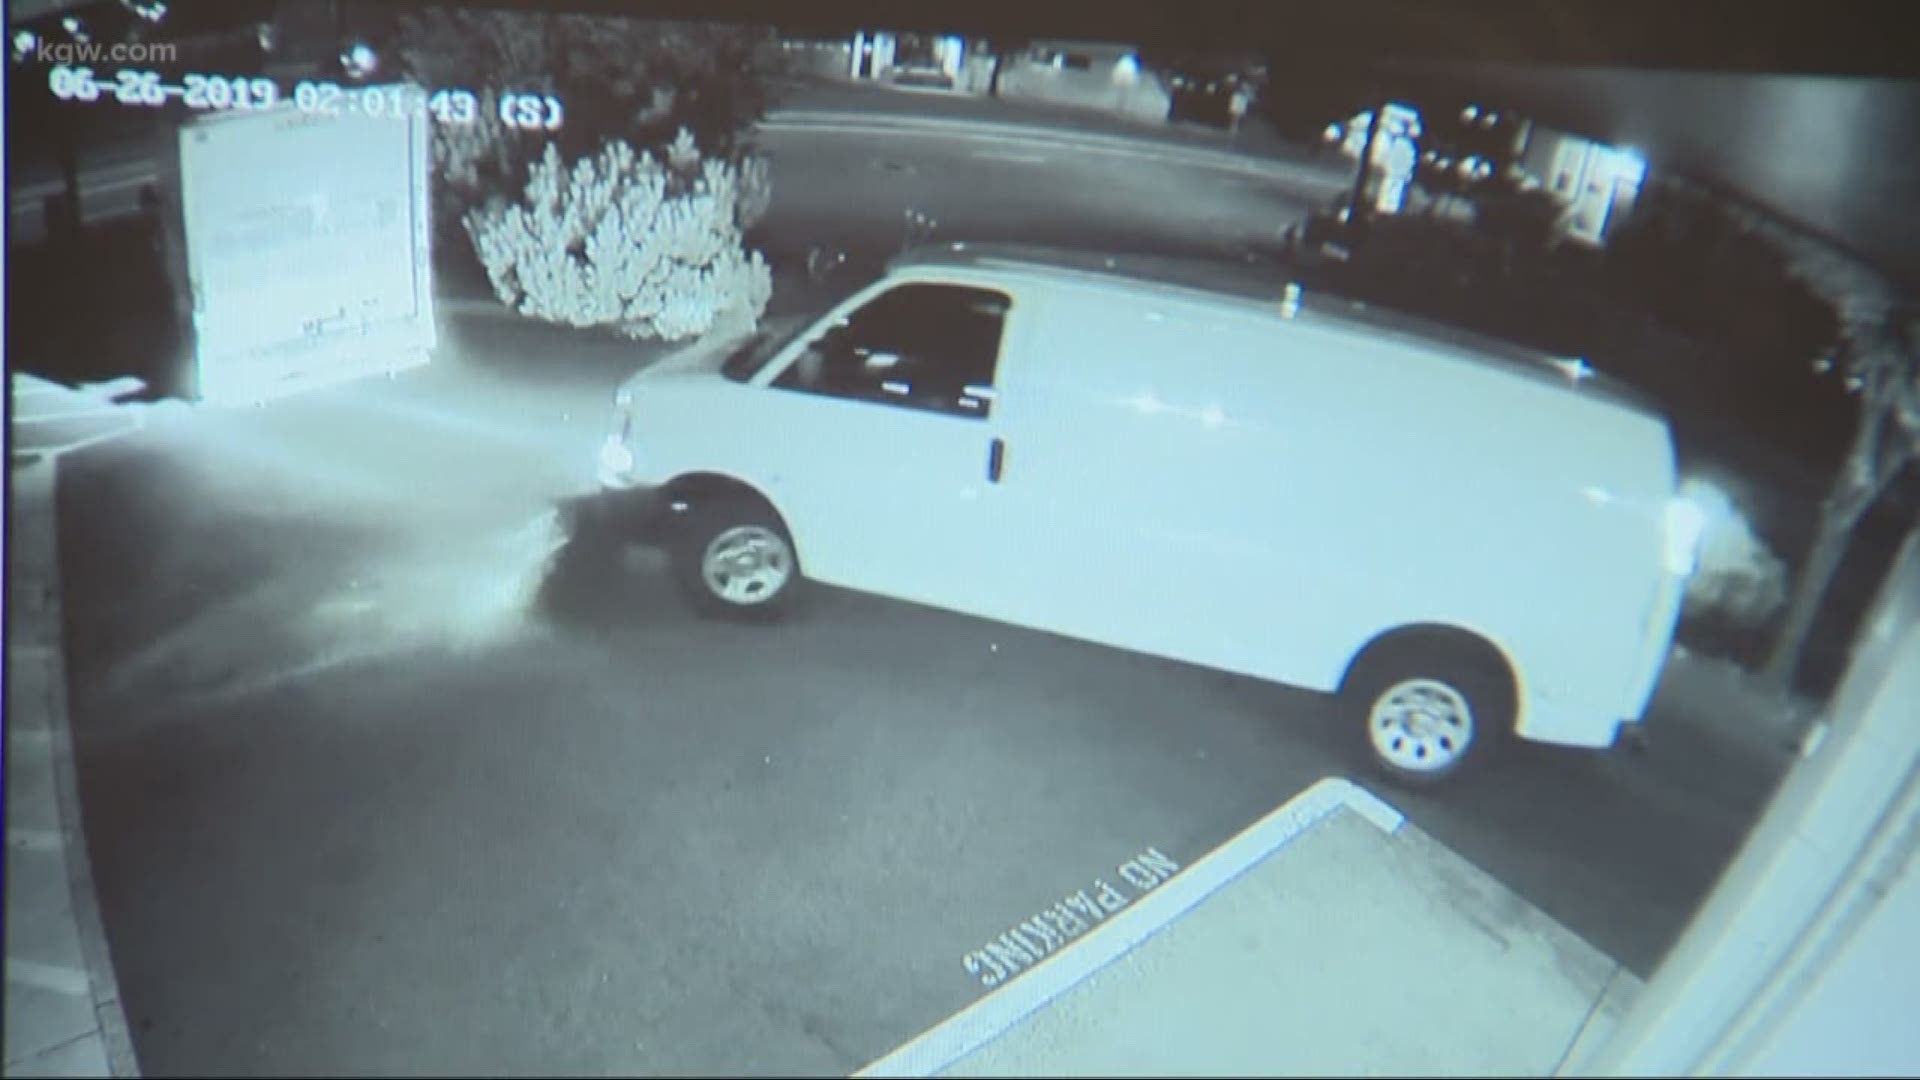 Surveillance video showed crooks stealing a box truck and food cart from a Southeast Portland business.